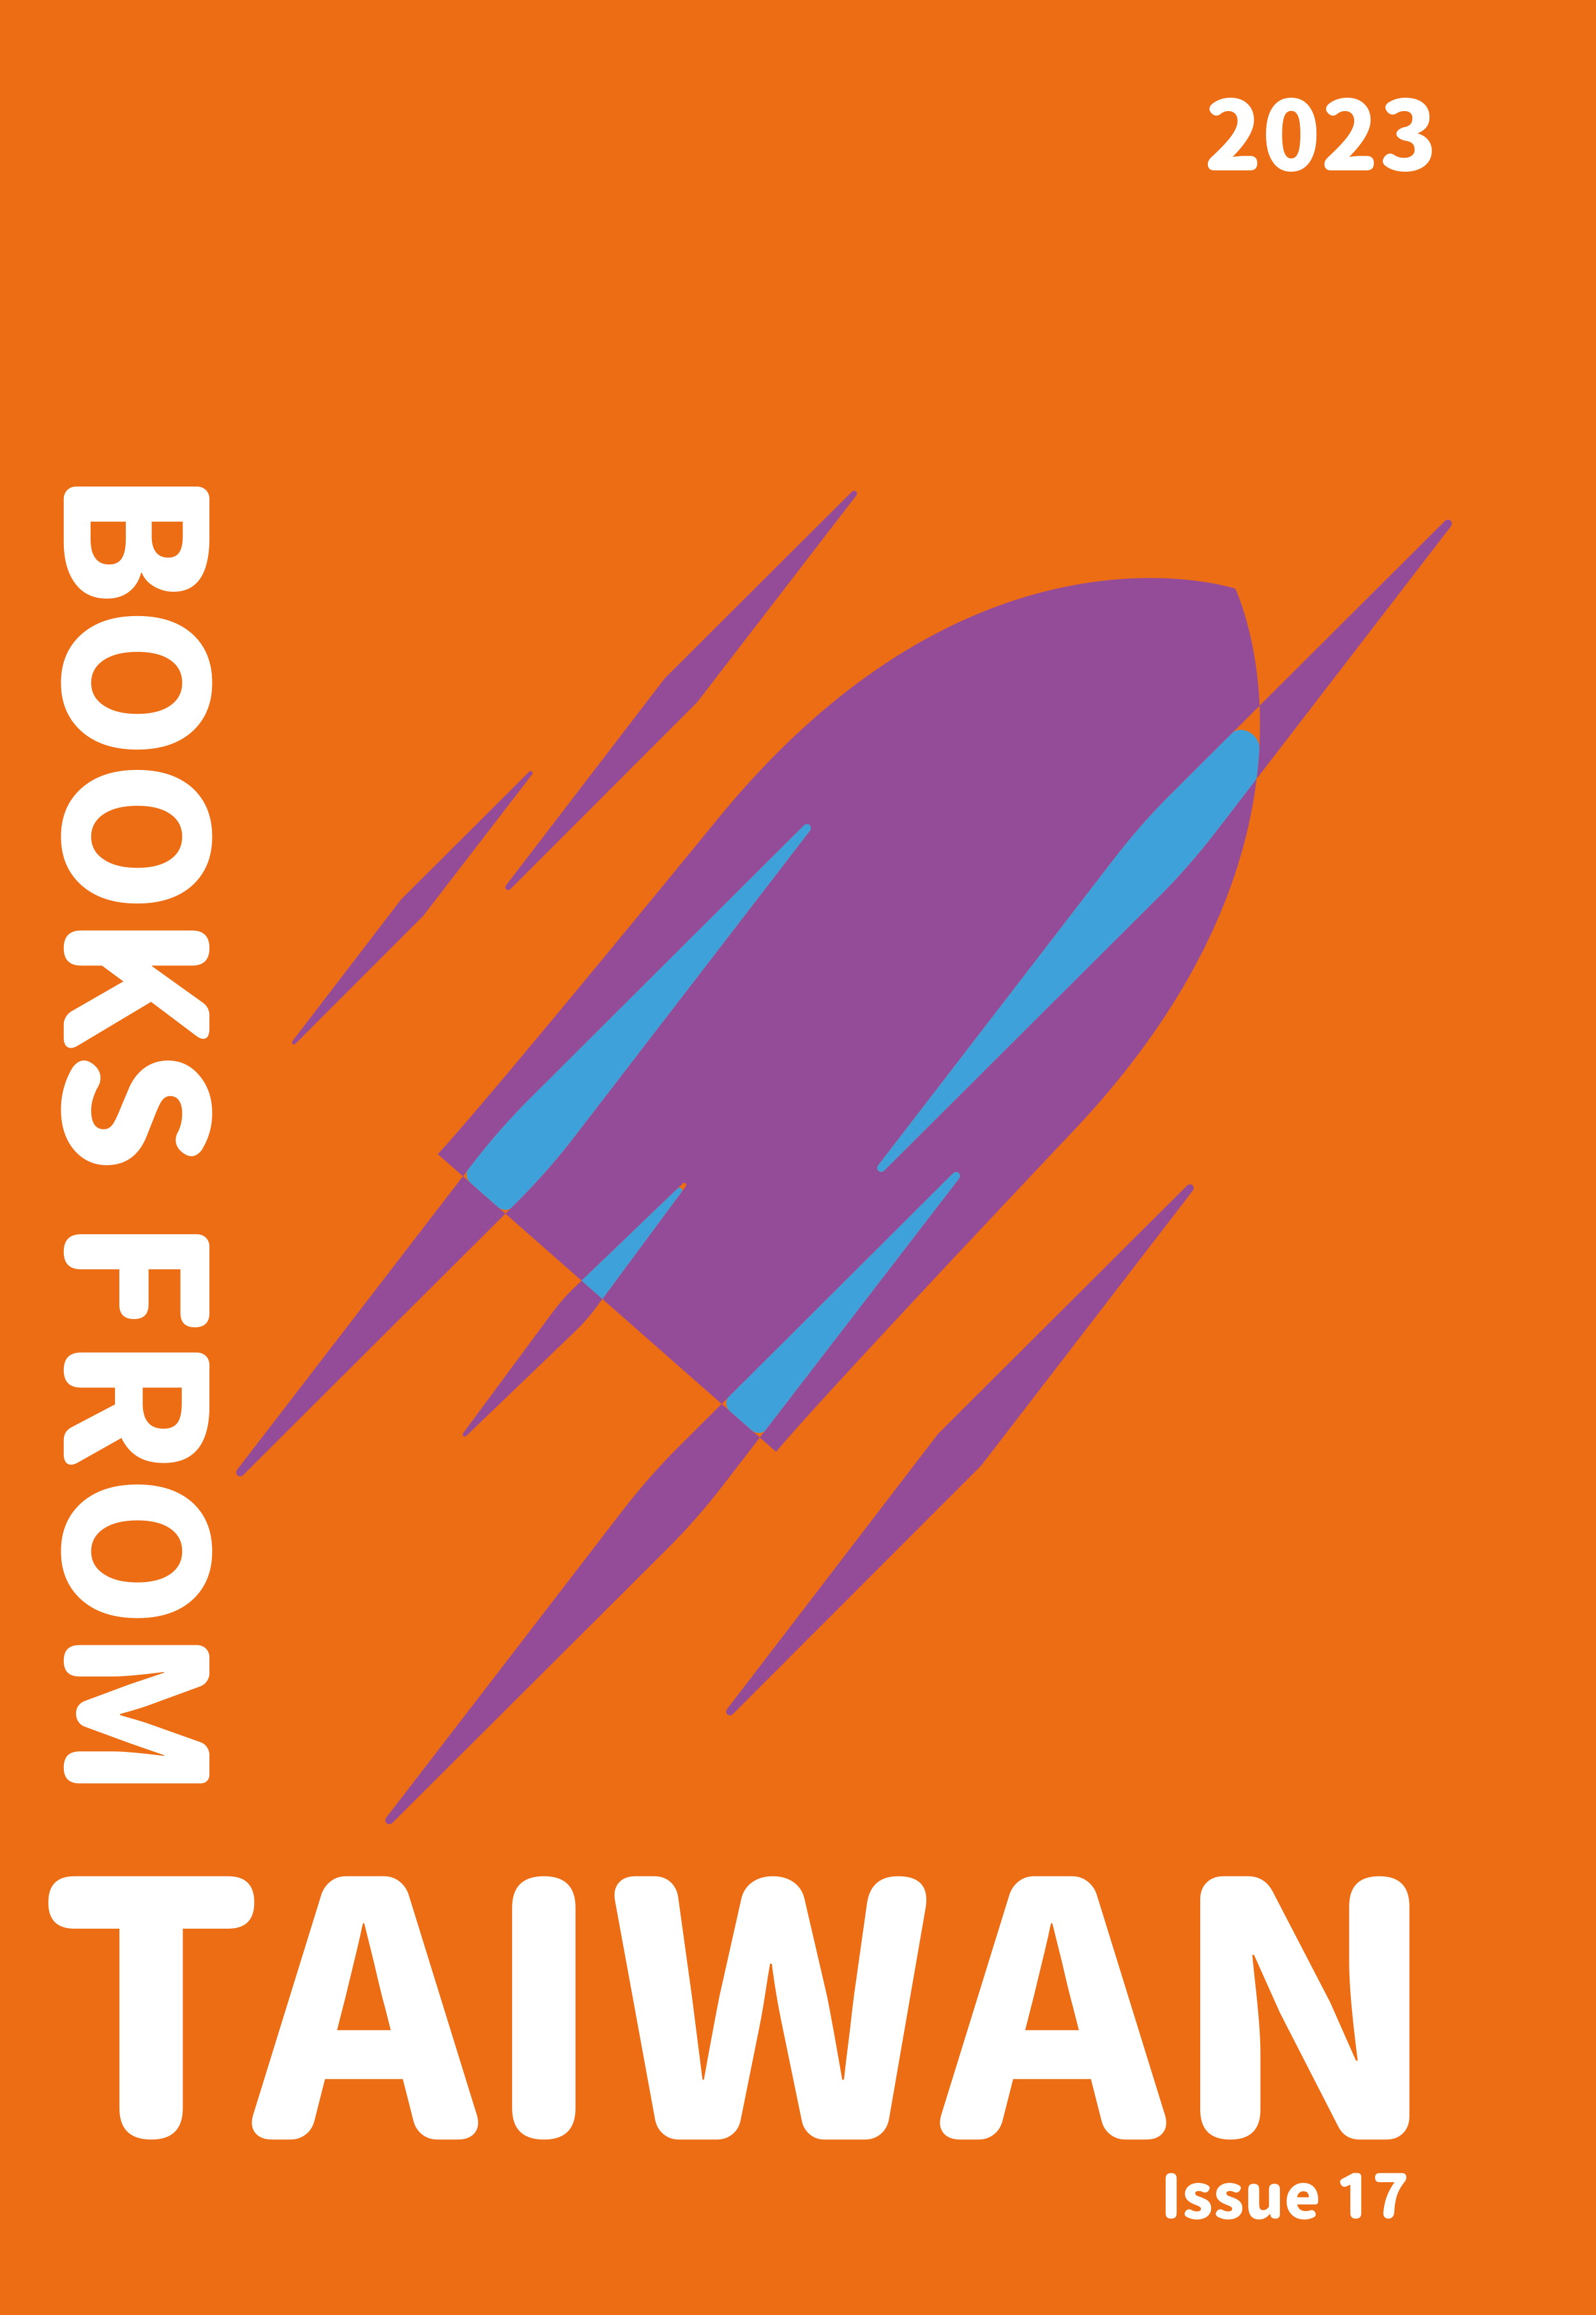 Books from Taiwan Issue 17